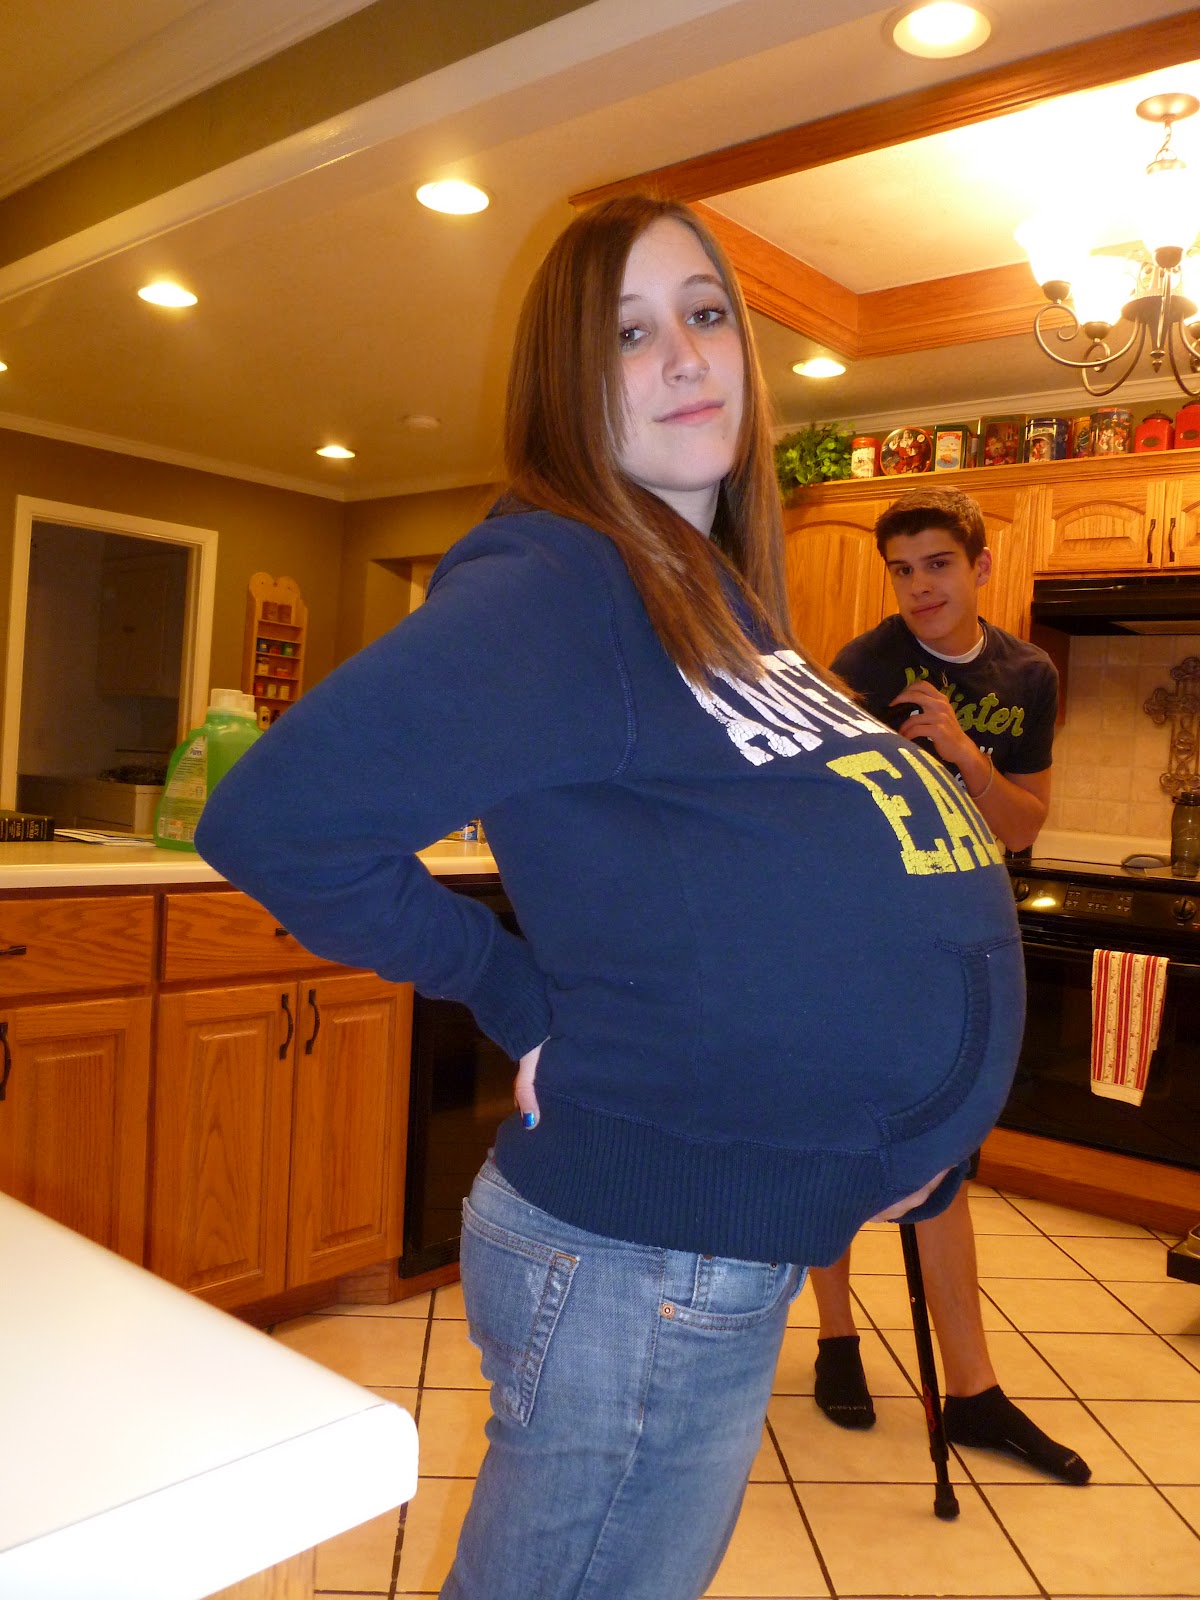 Bellys Picture Pregnant Teen